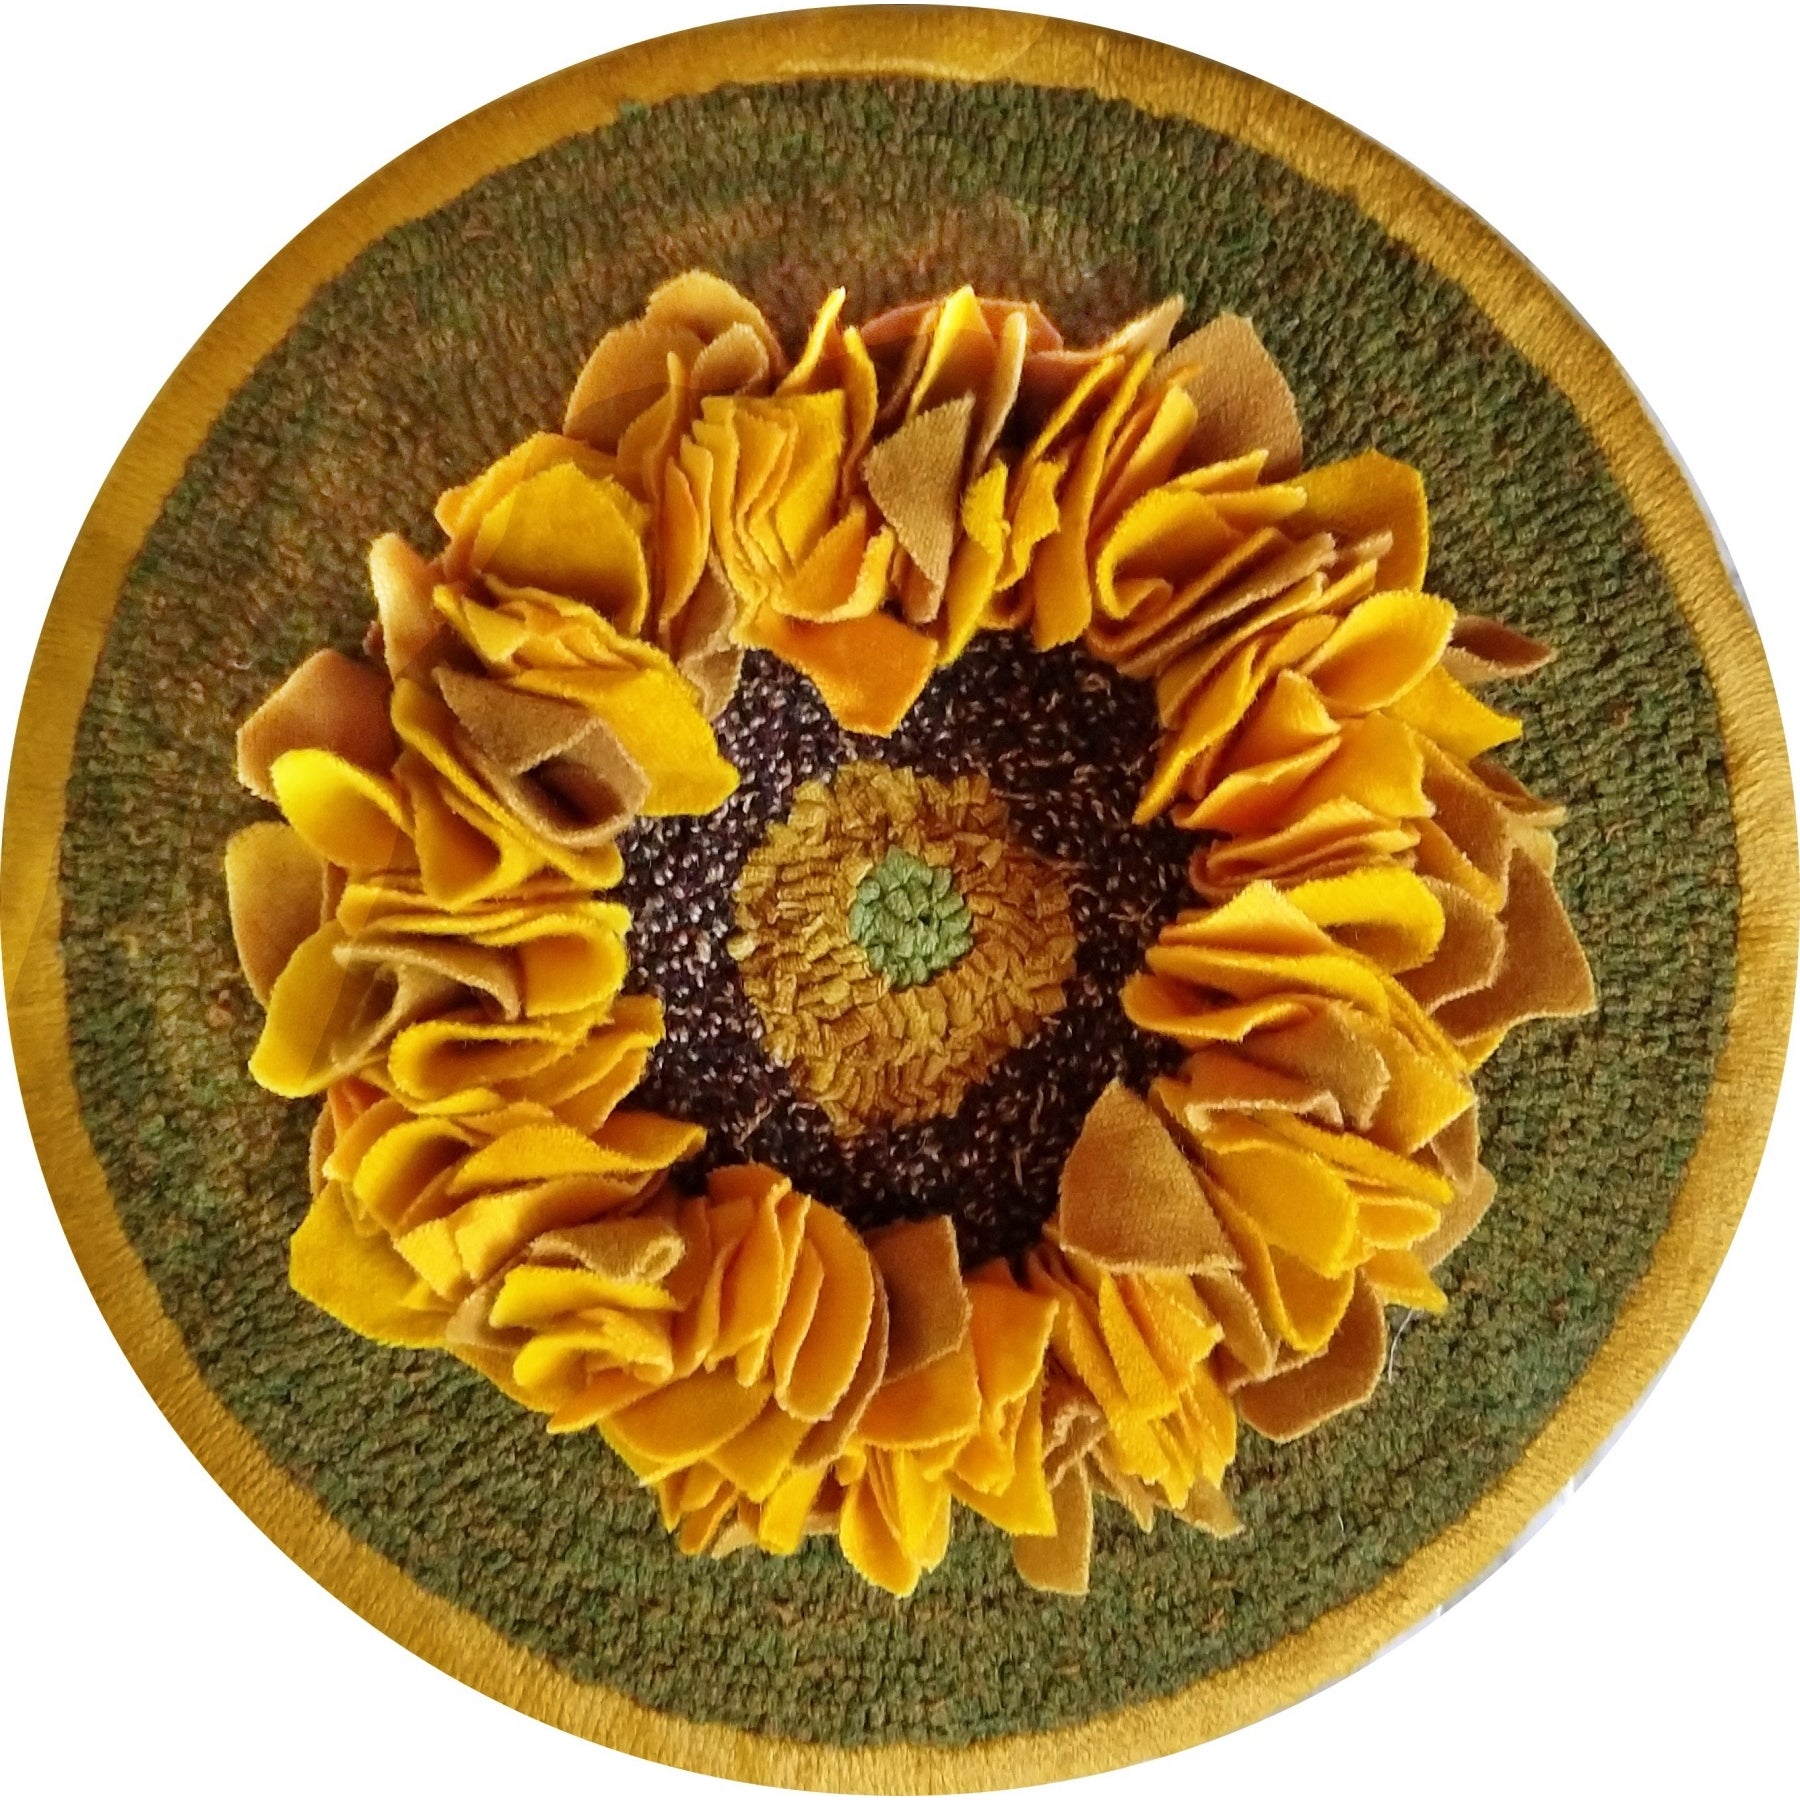 Sunflower, rug hooked by Liz Crouch